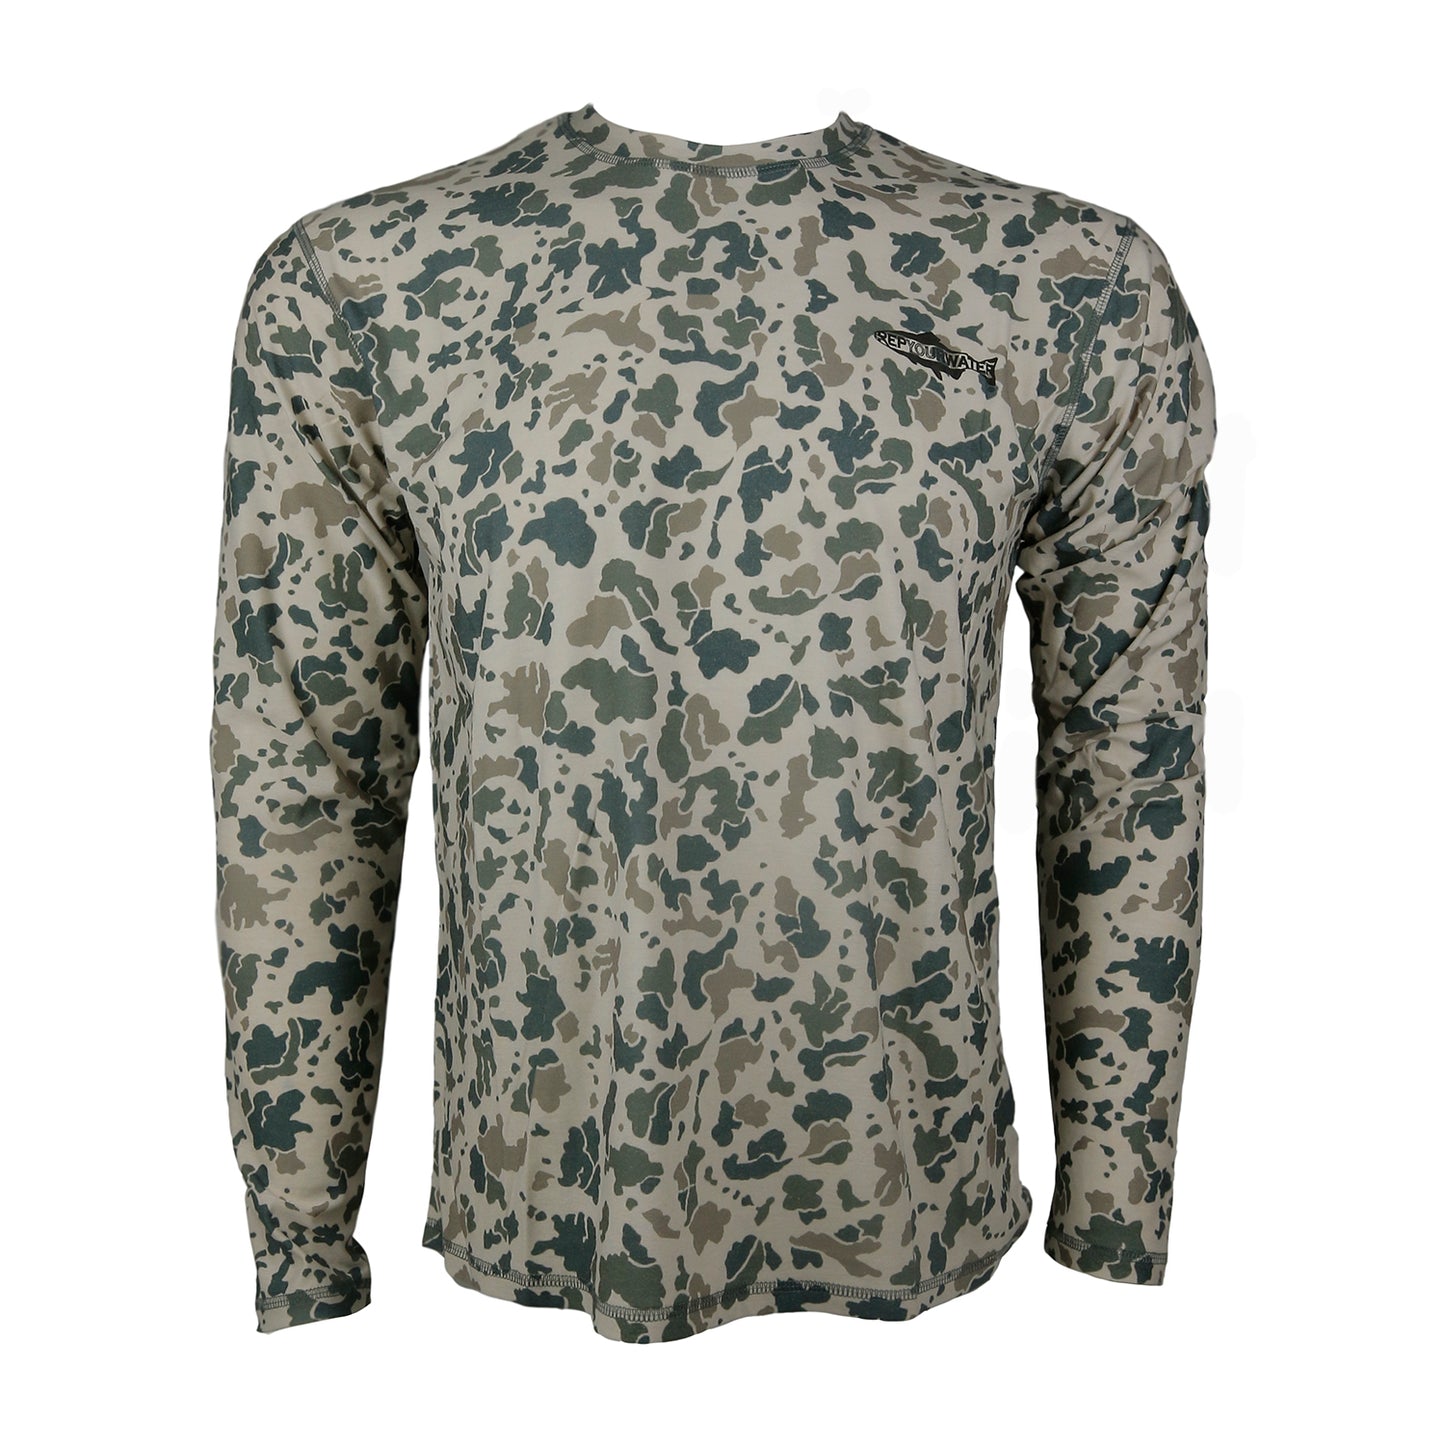 A camo printed long sleeved sun shirt from the front.